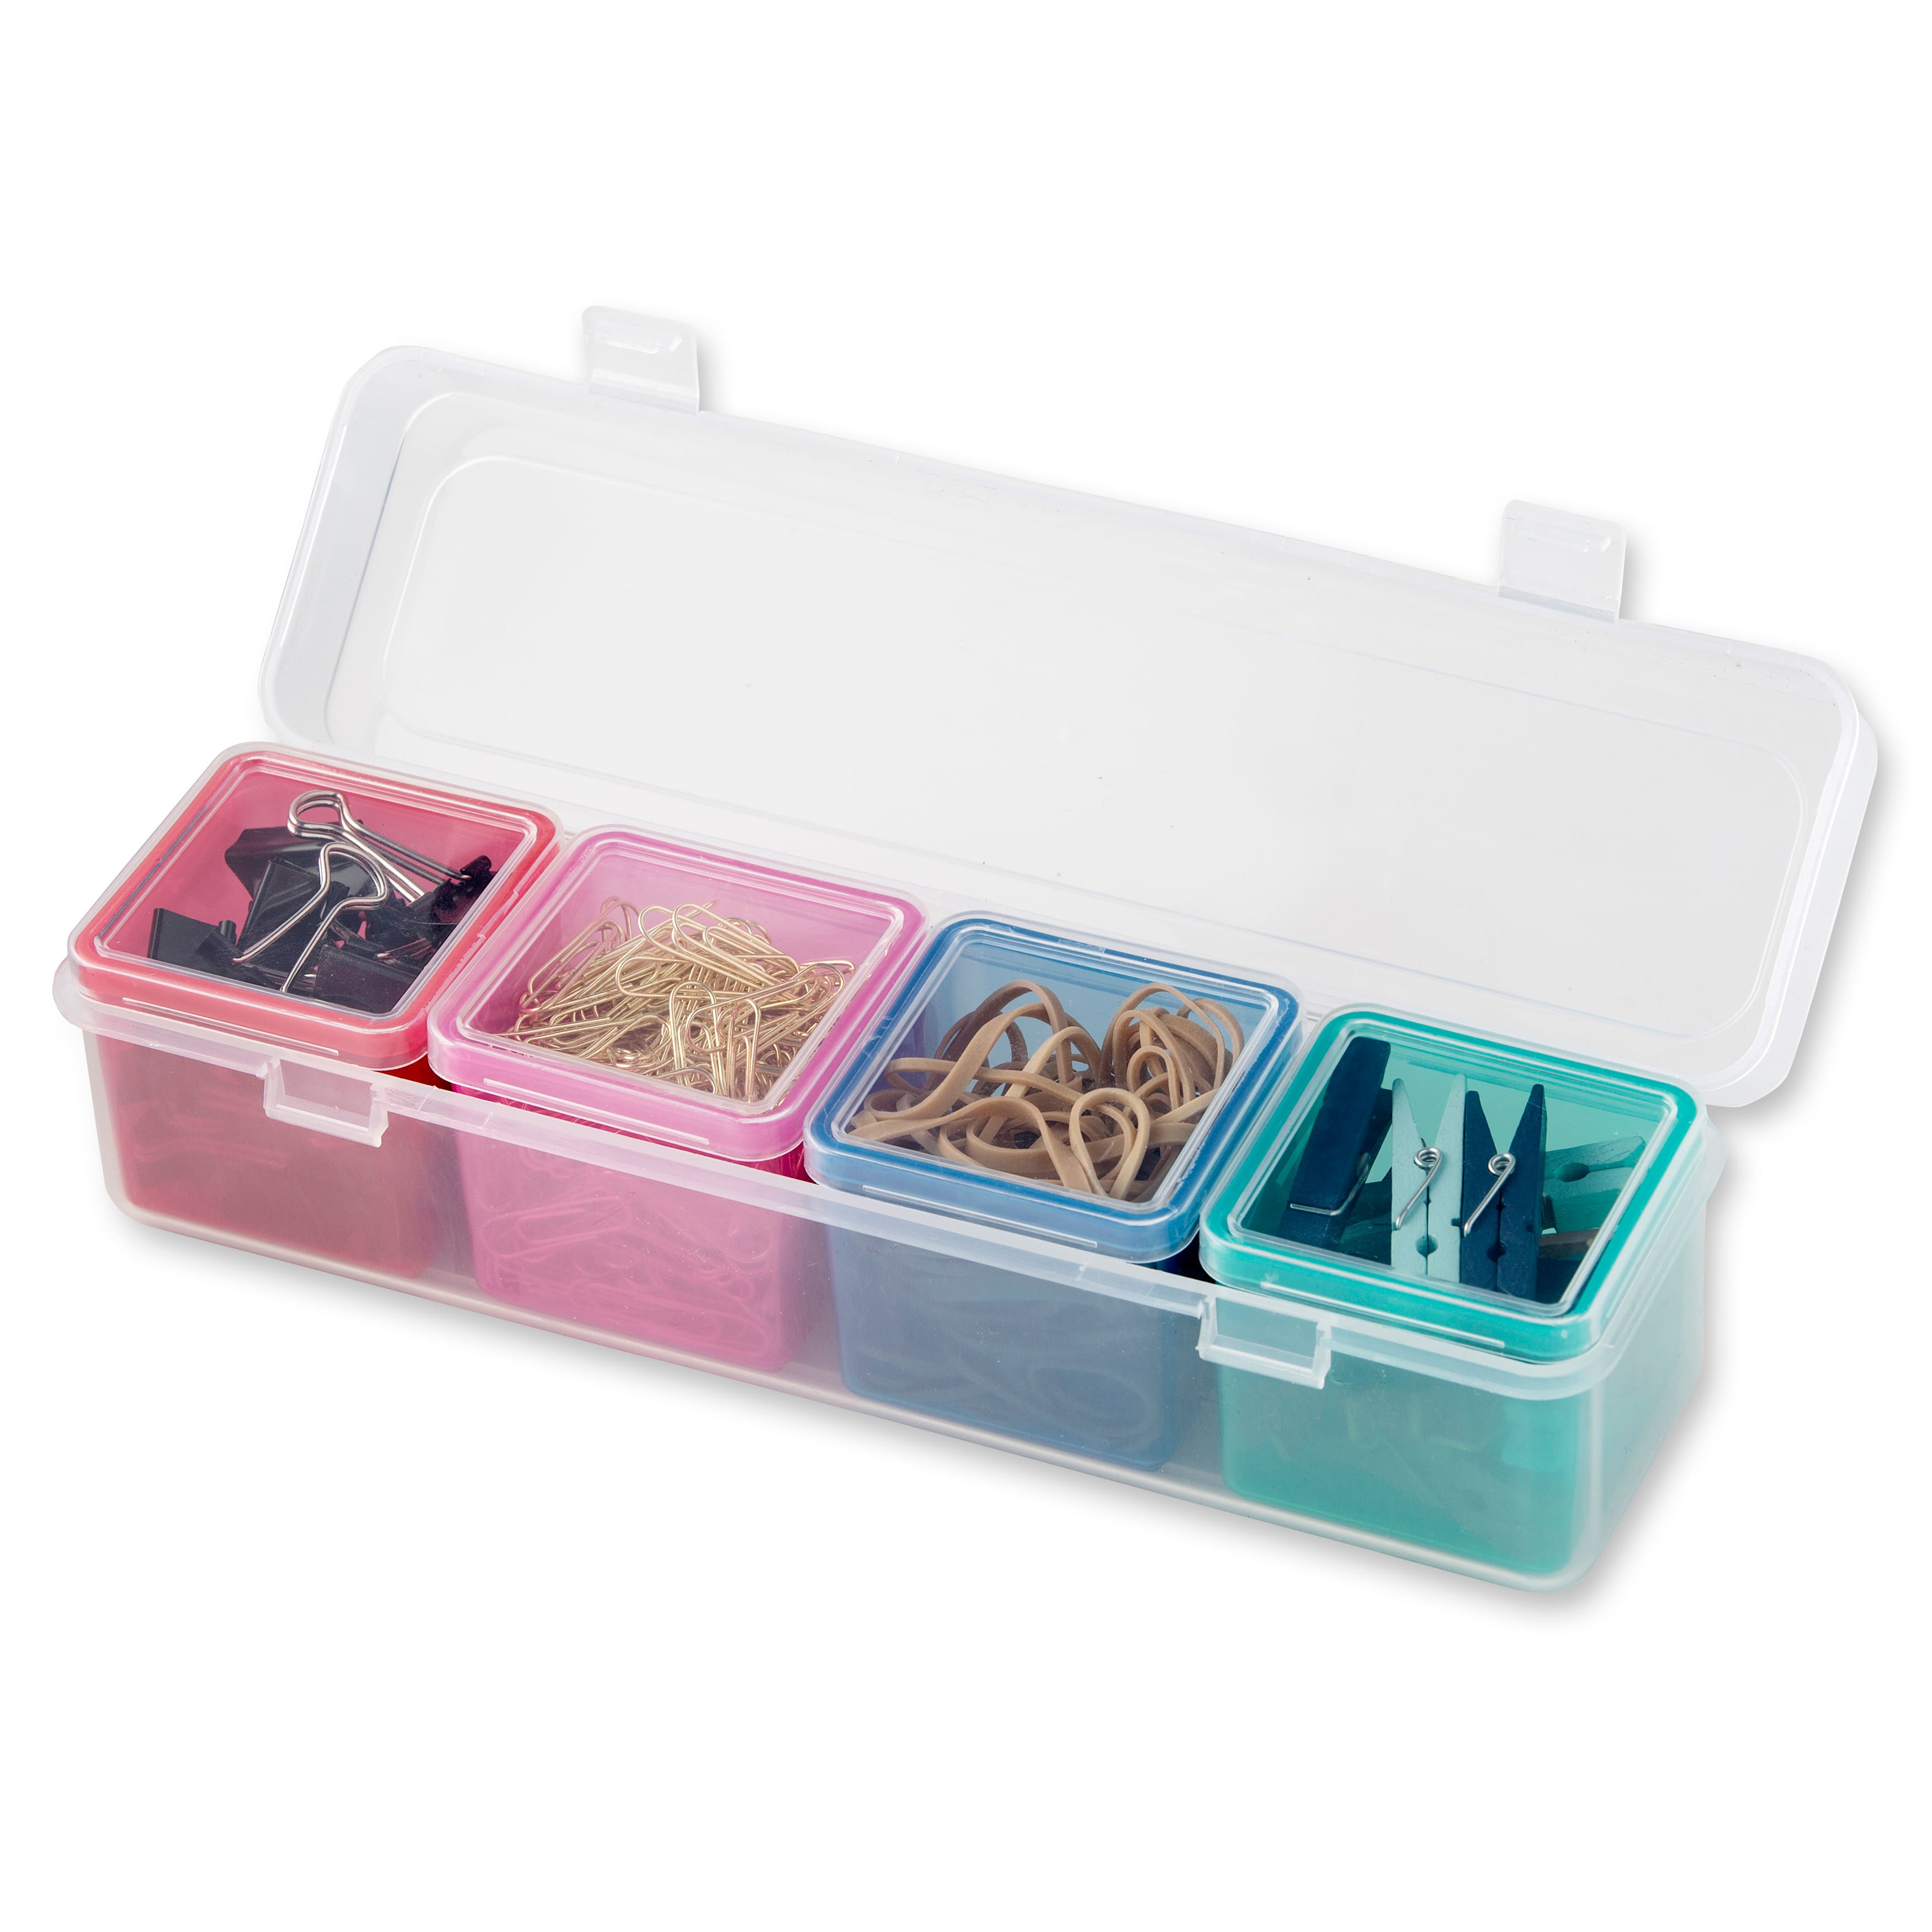 SIMPLY TIDY AT MICHAELS, I've been searching for the perfect storage  solutions to fit my personal crafting needs! #ad Well, the NEW Simply Tidy  Modular System from Michaels, By MeaghanMakes